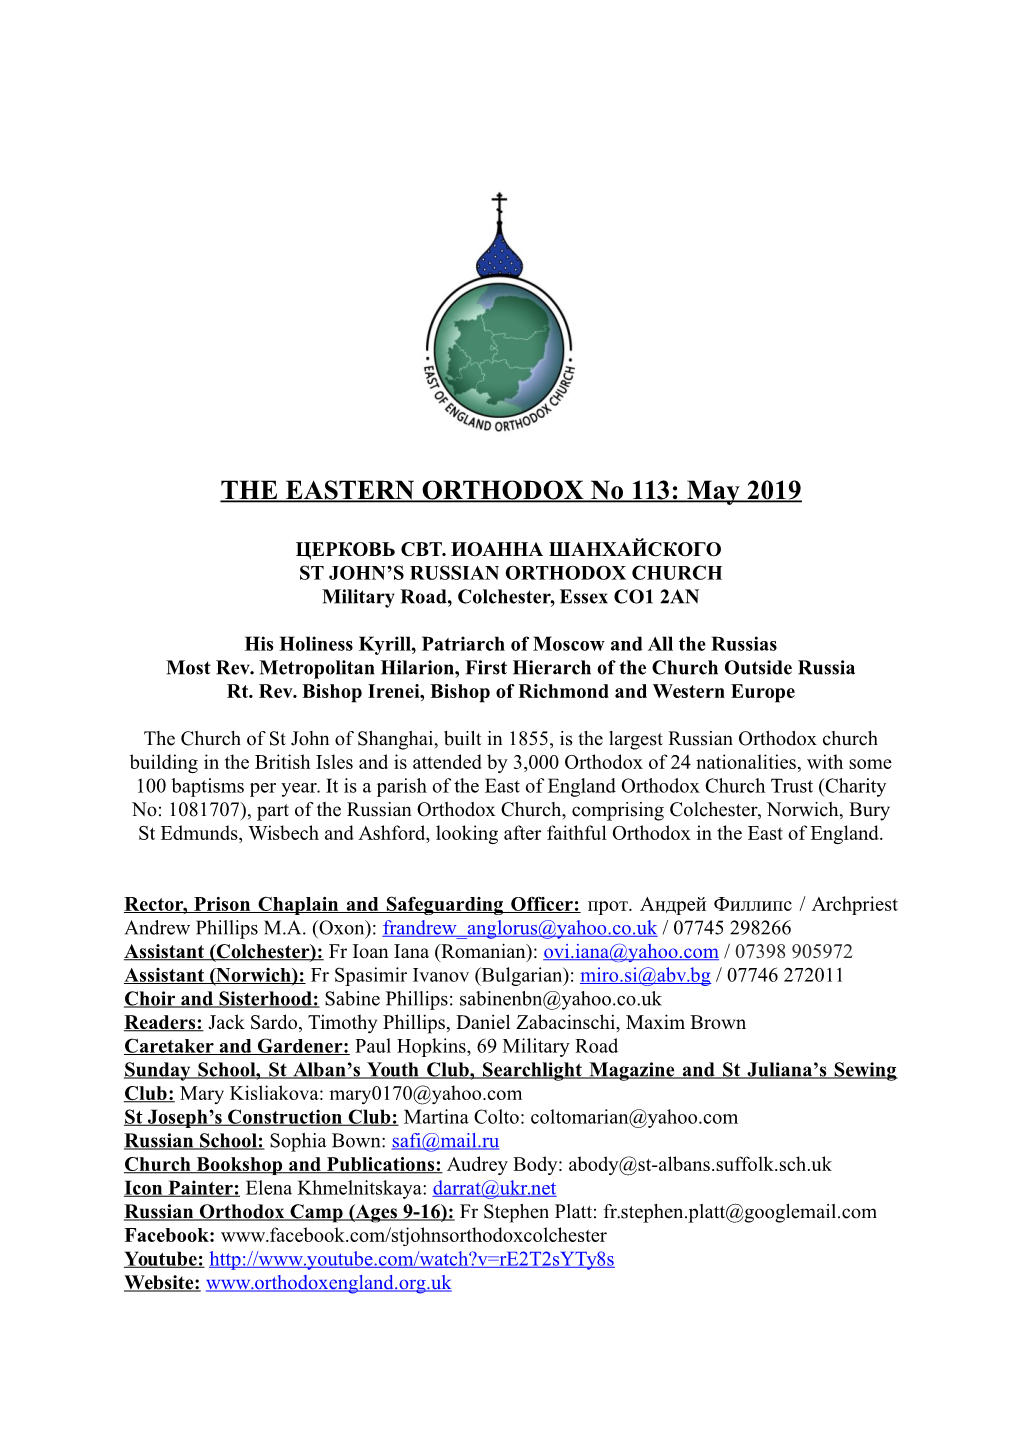 THE EASTERN ORTHODOX No 113: May 2019